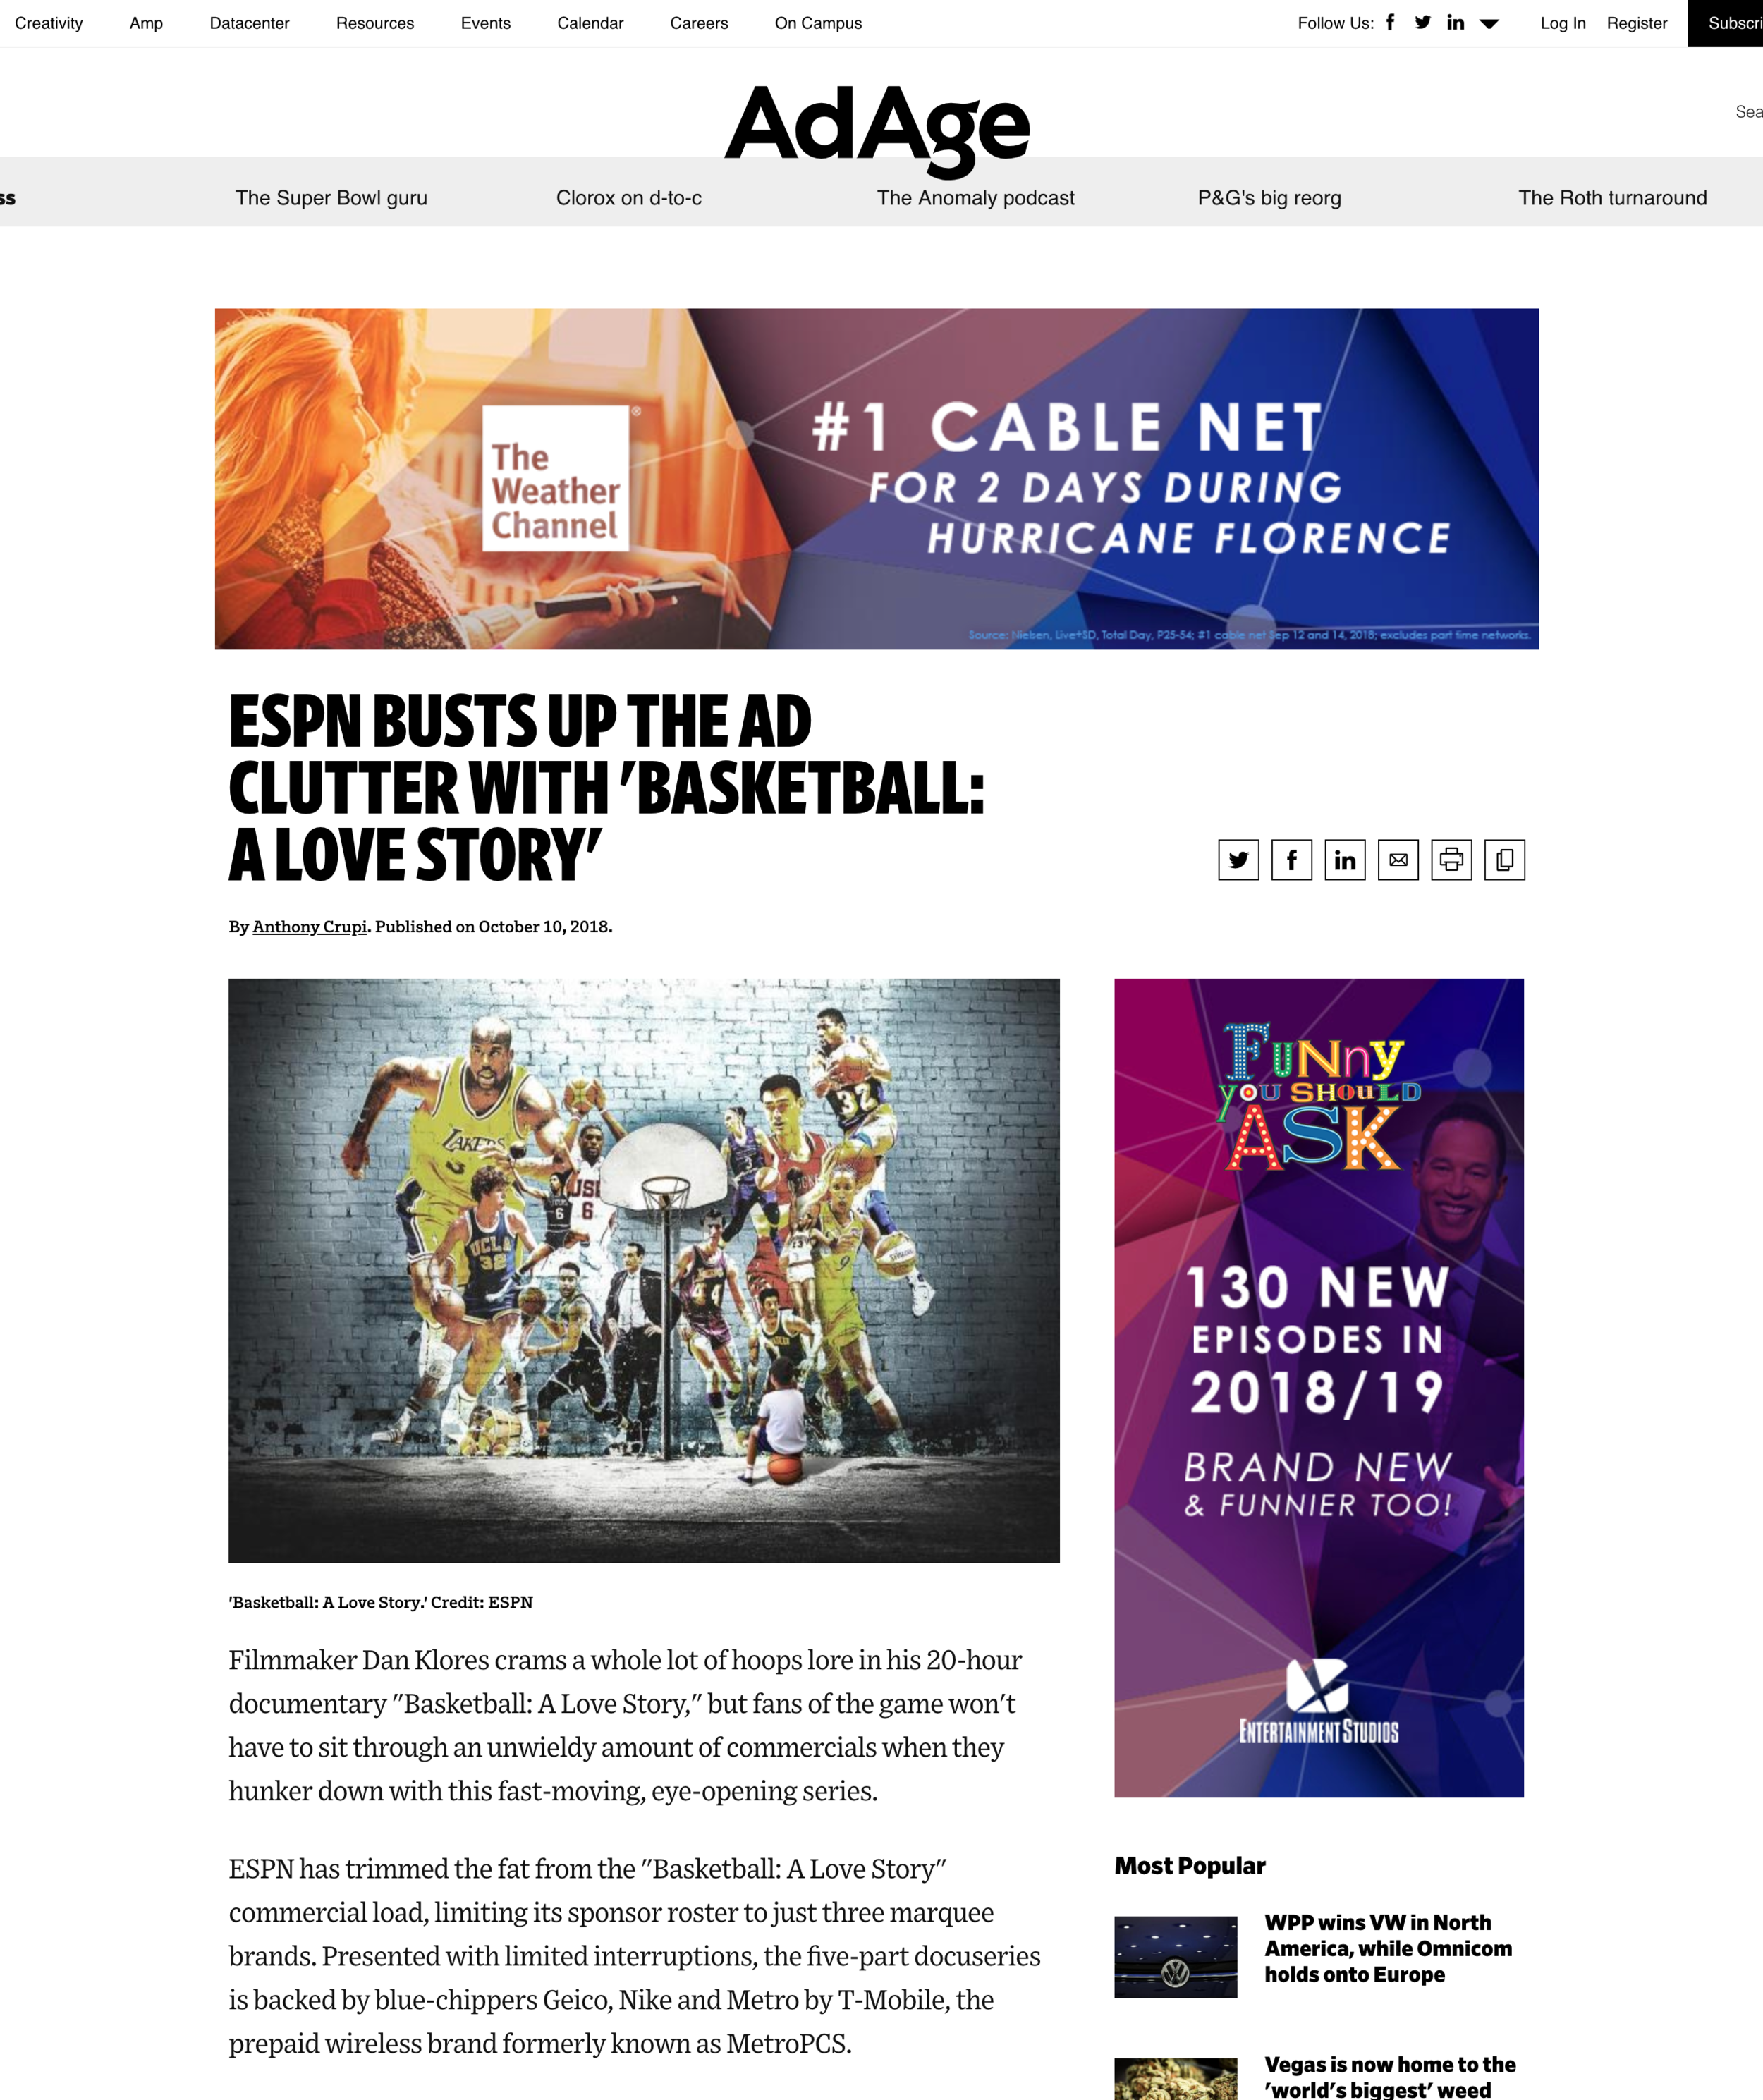 screencapture-adage-article-media-espn-basketball-a-love-story-reduced-commercial-load-315211-2018-11-26-14_37_17.png